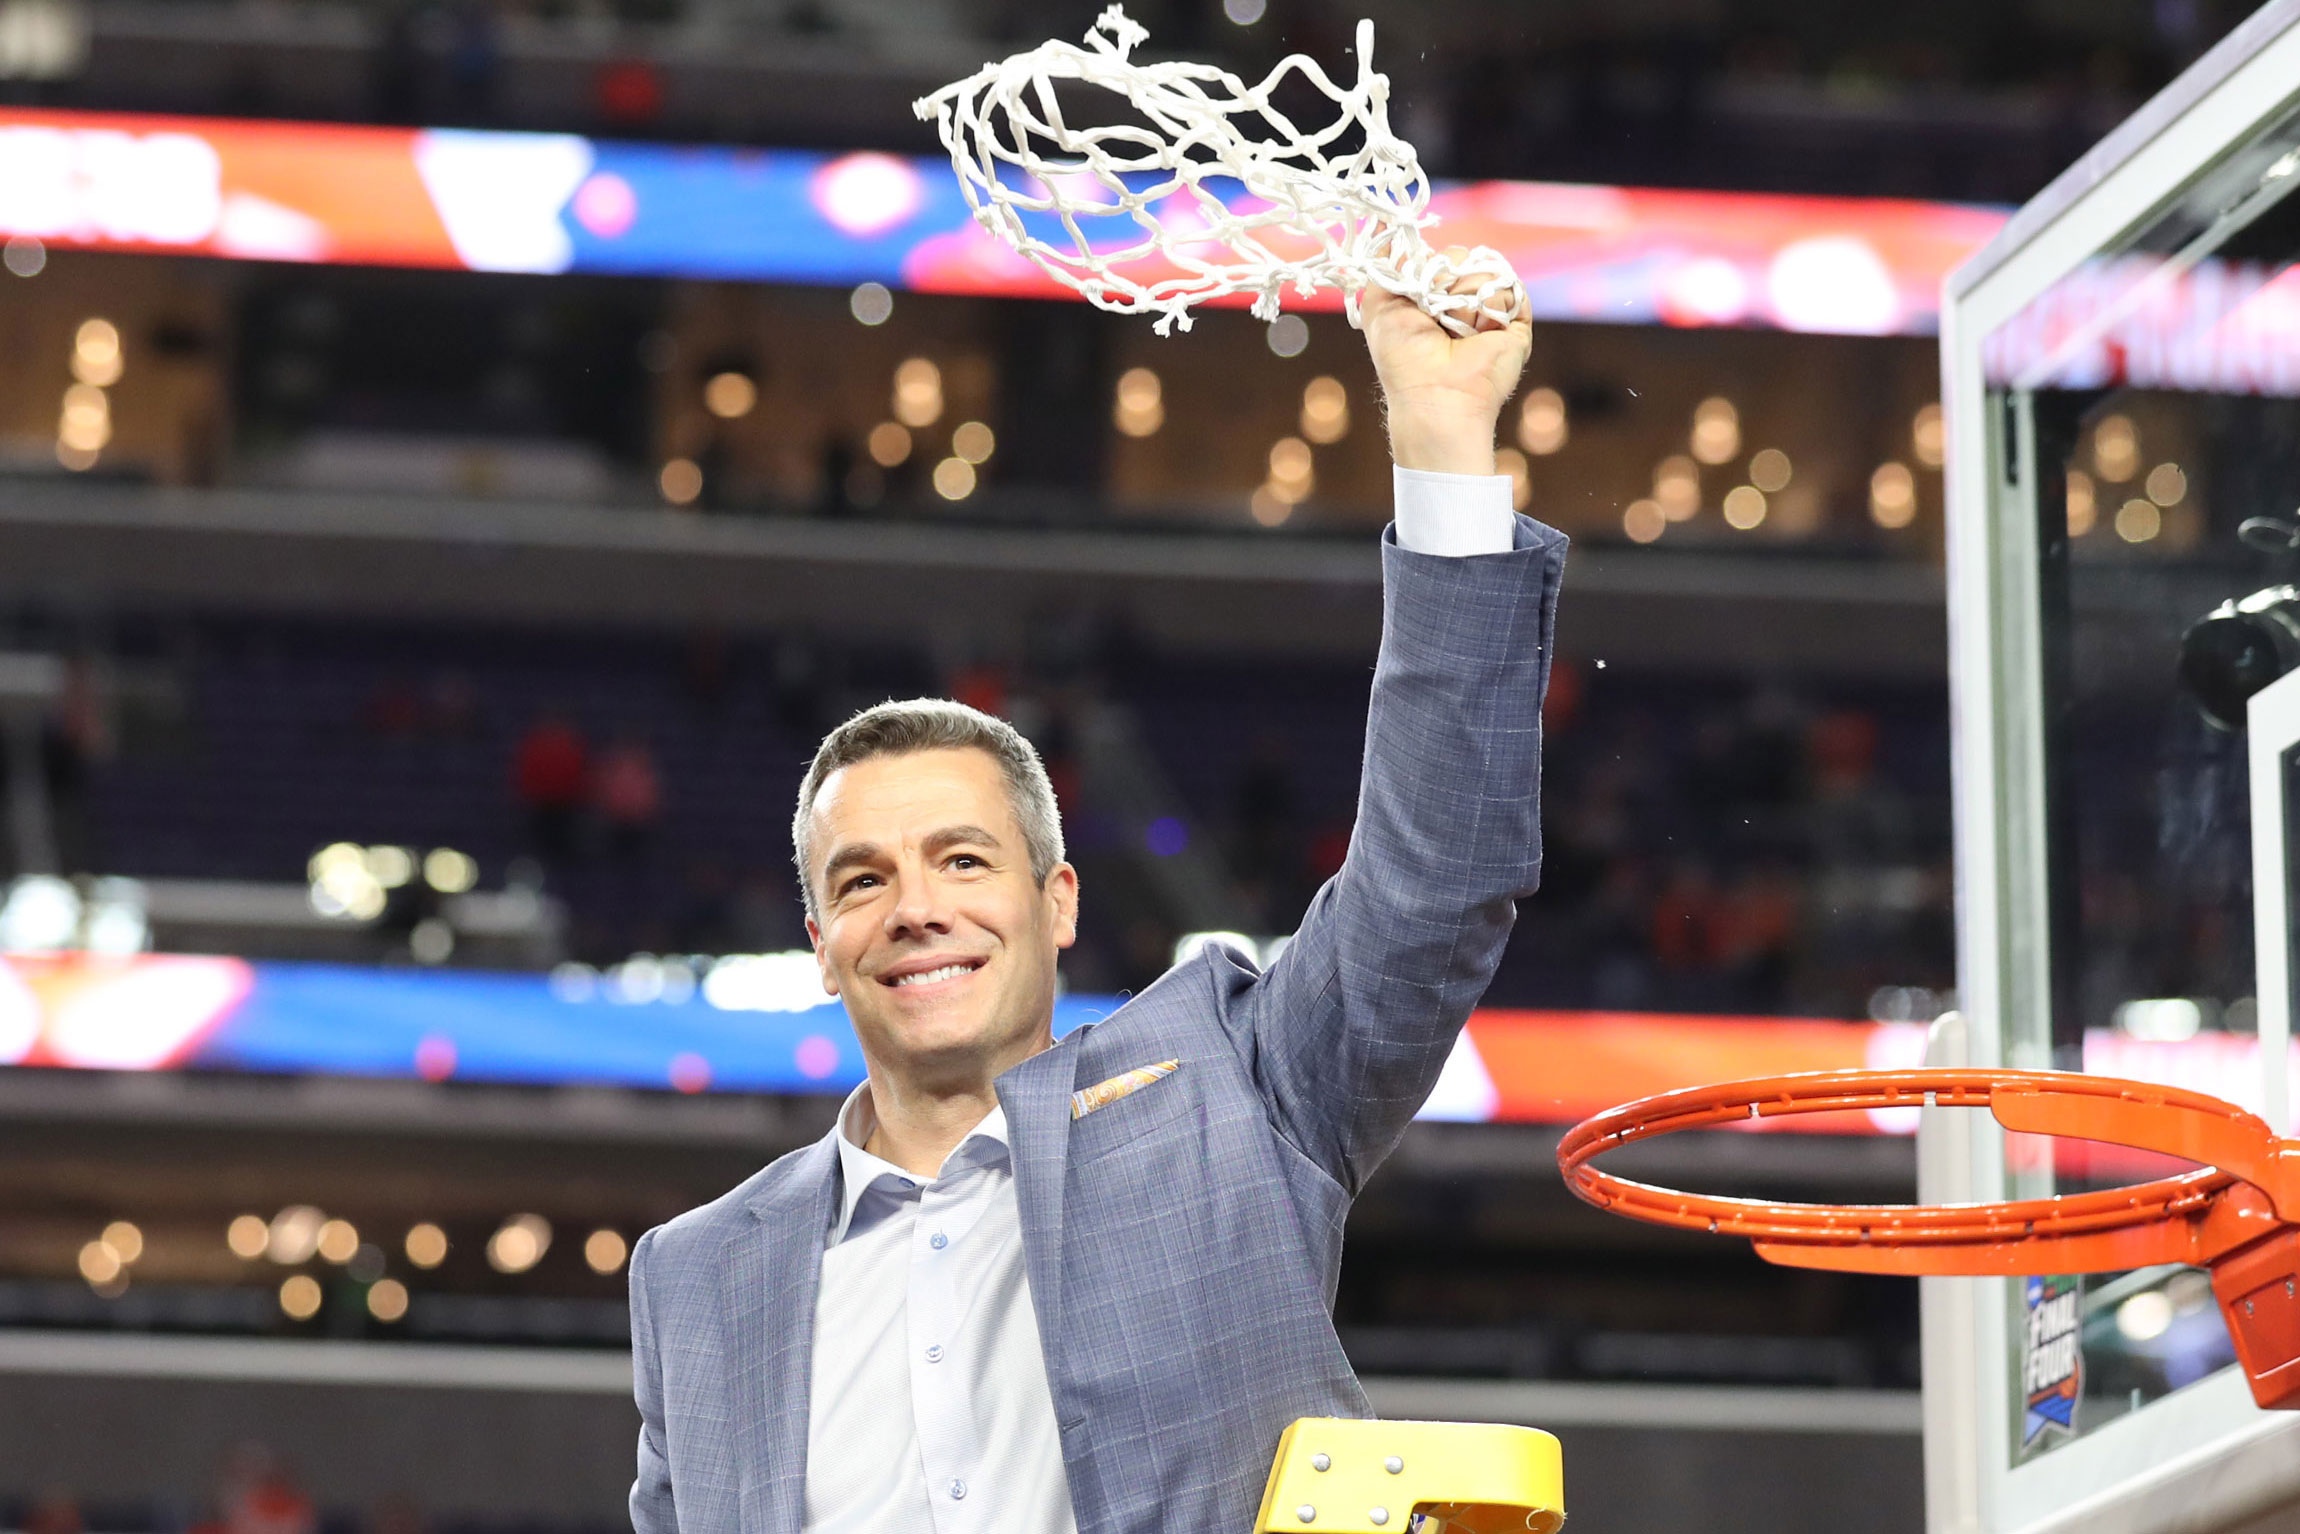 Tony Bennett, Dean and Markel Families Men’s Basketball Head Coach, said he was “blessed beyond what I deserve,” declined a raise and made a gift to a career development program for his players. 